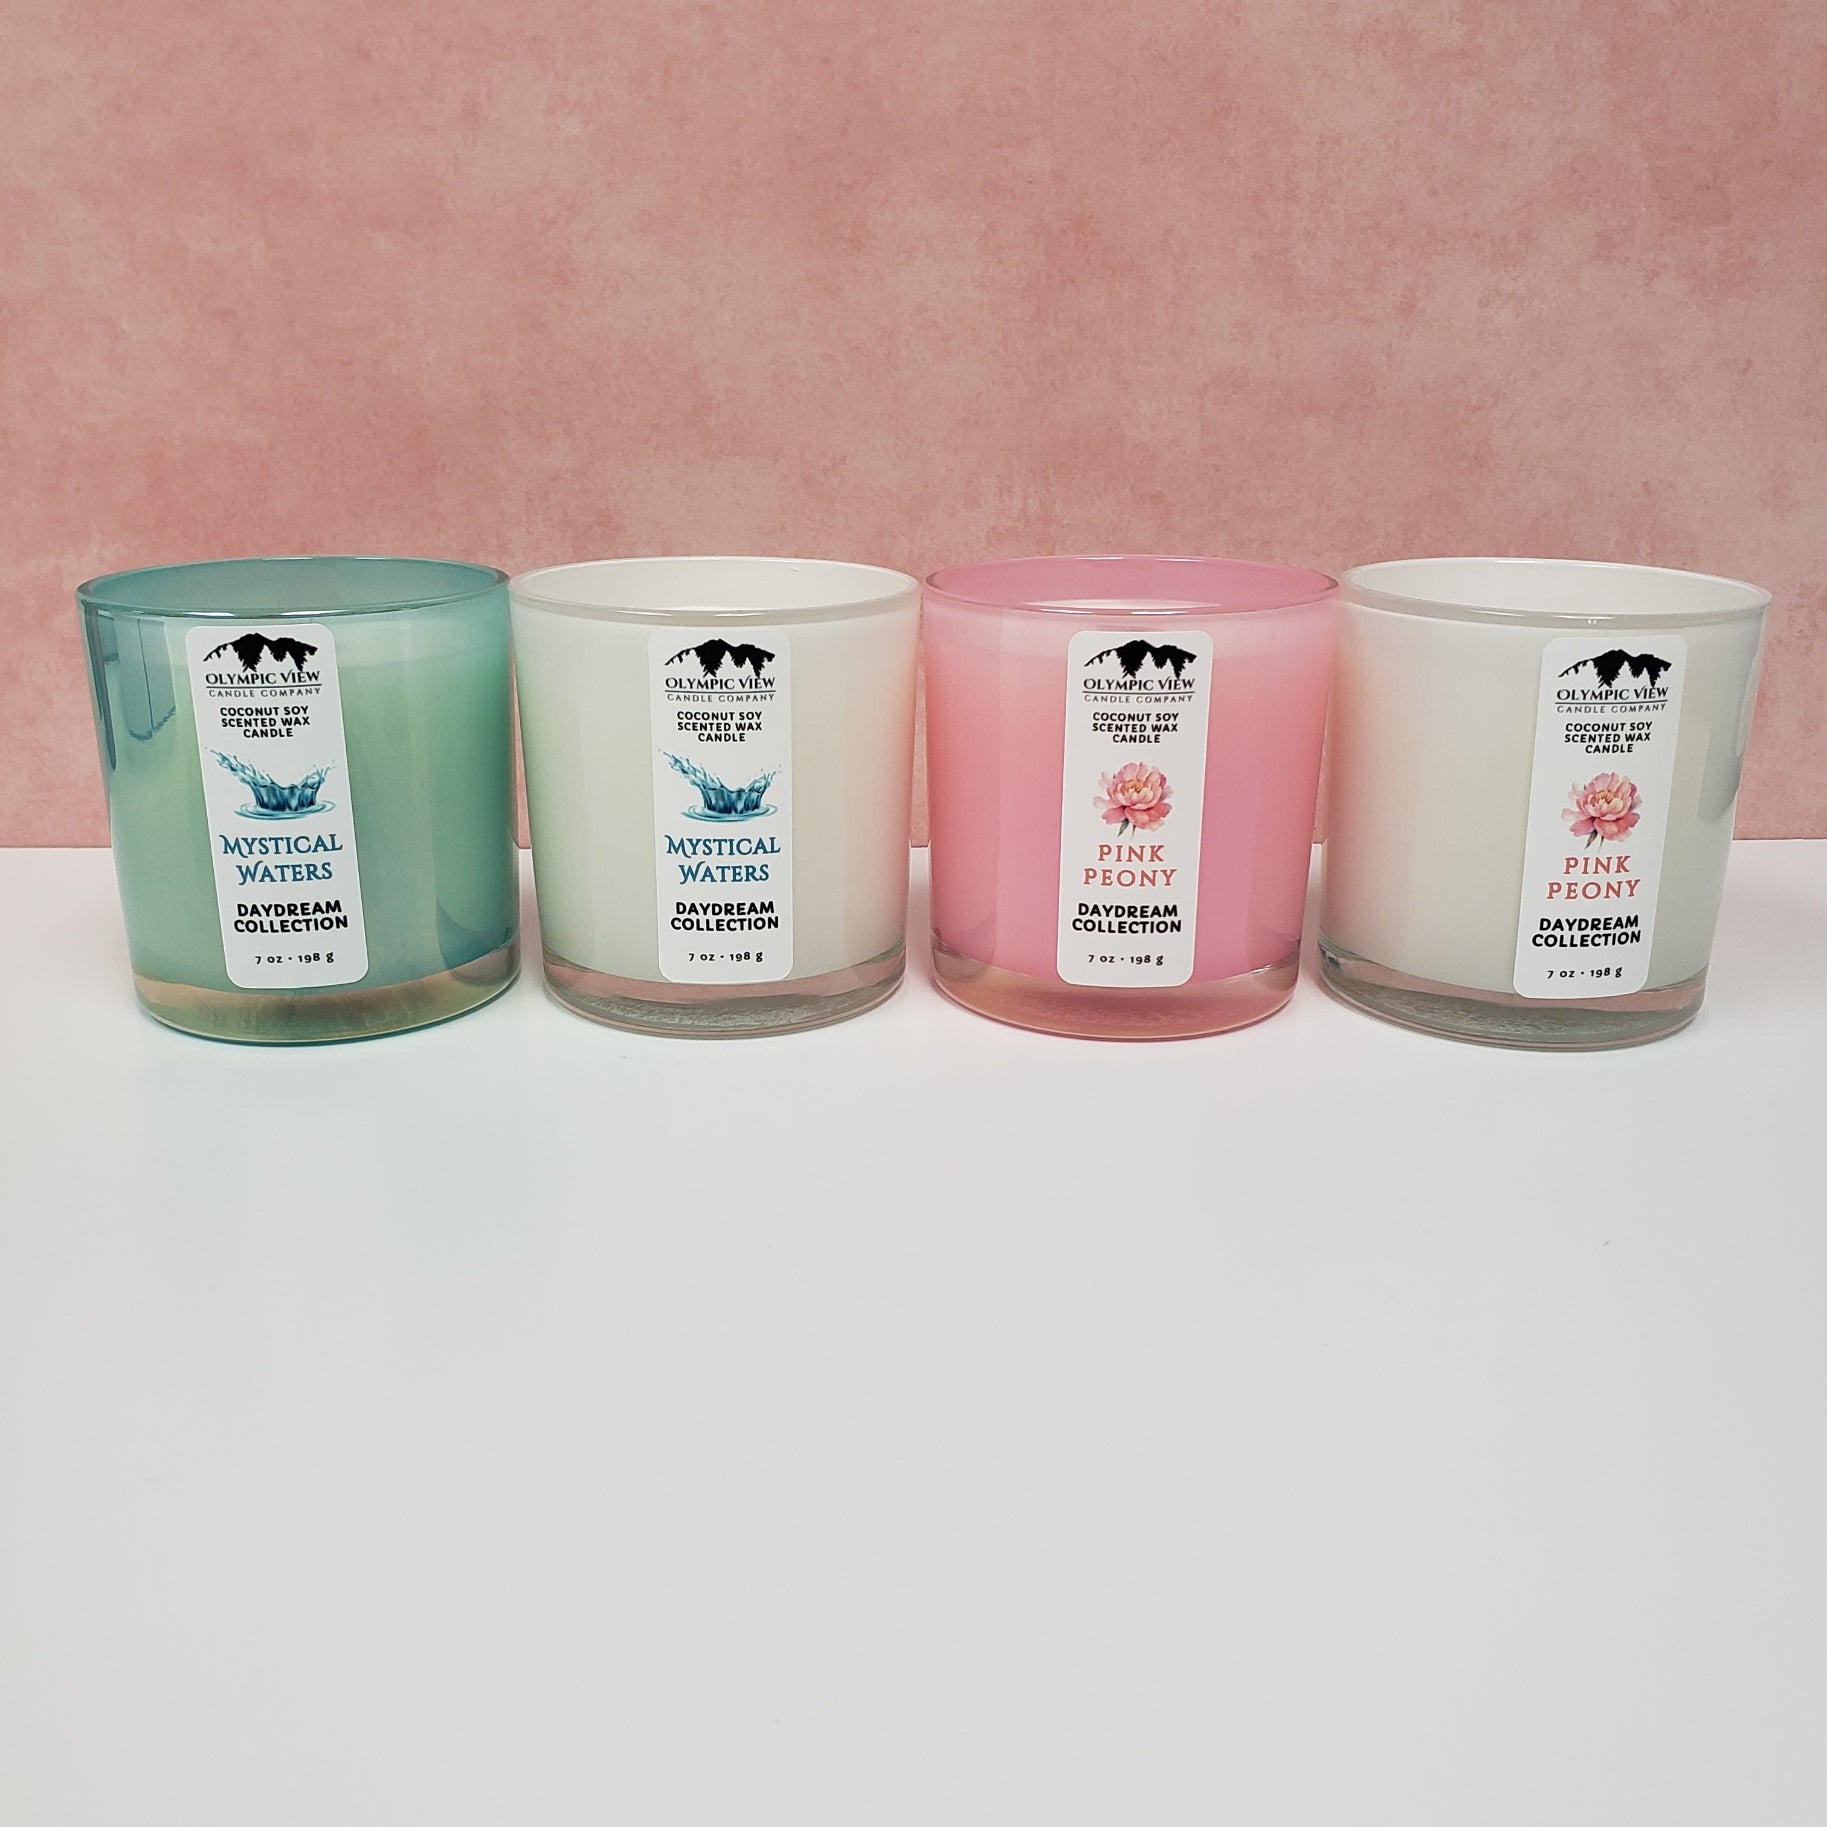 4 jars of our Daydream Collection including Pink Peony and Mystical Waters.  Candle jars are in Mermaid teal, milk white, and Unicorn pink.